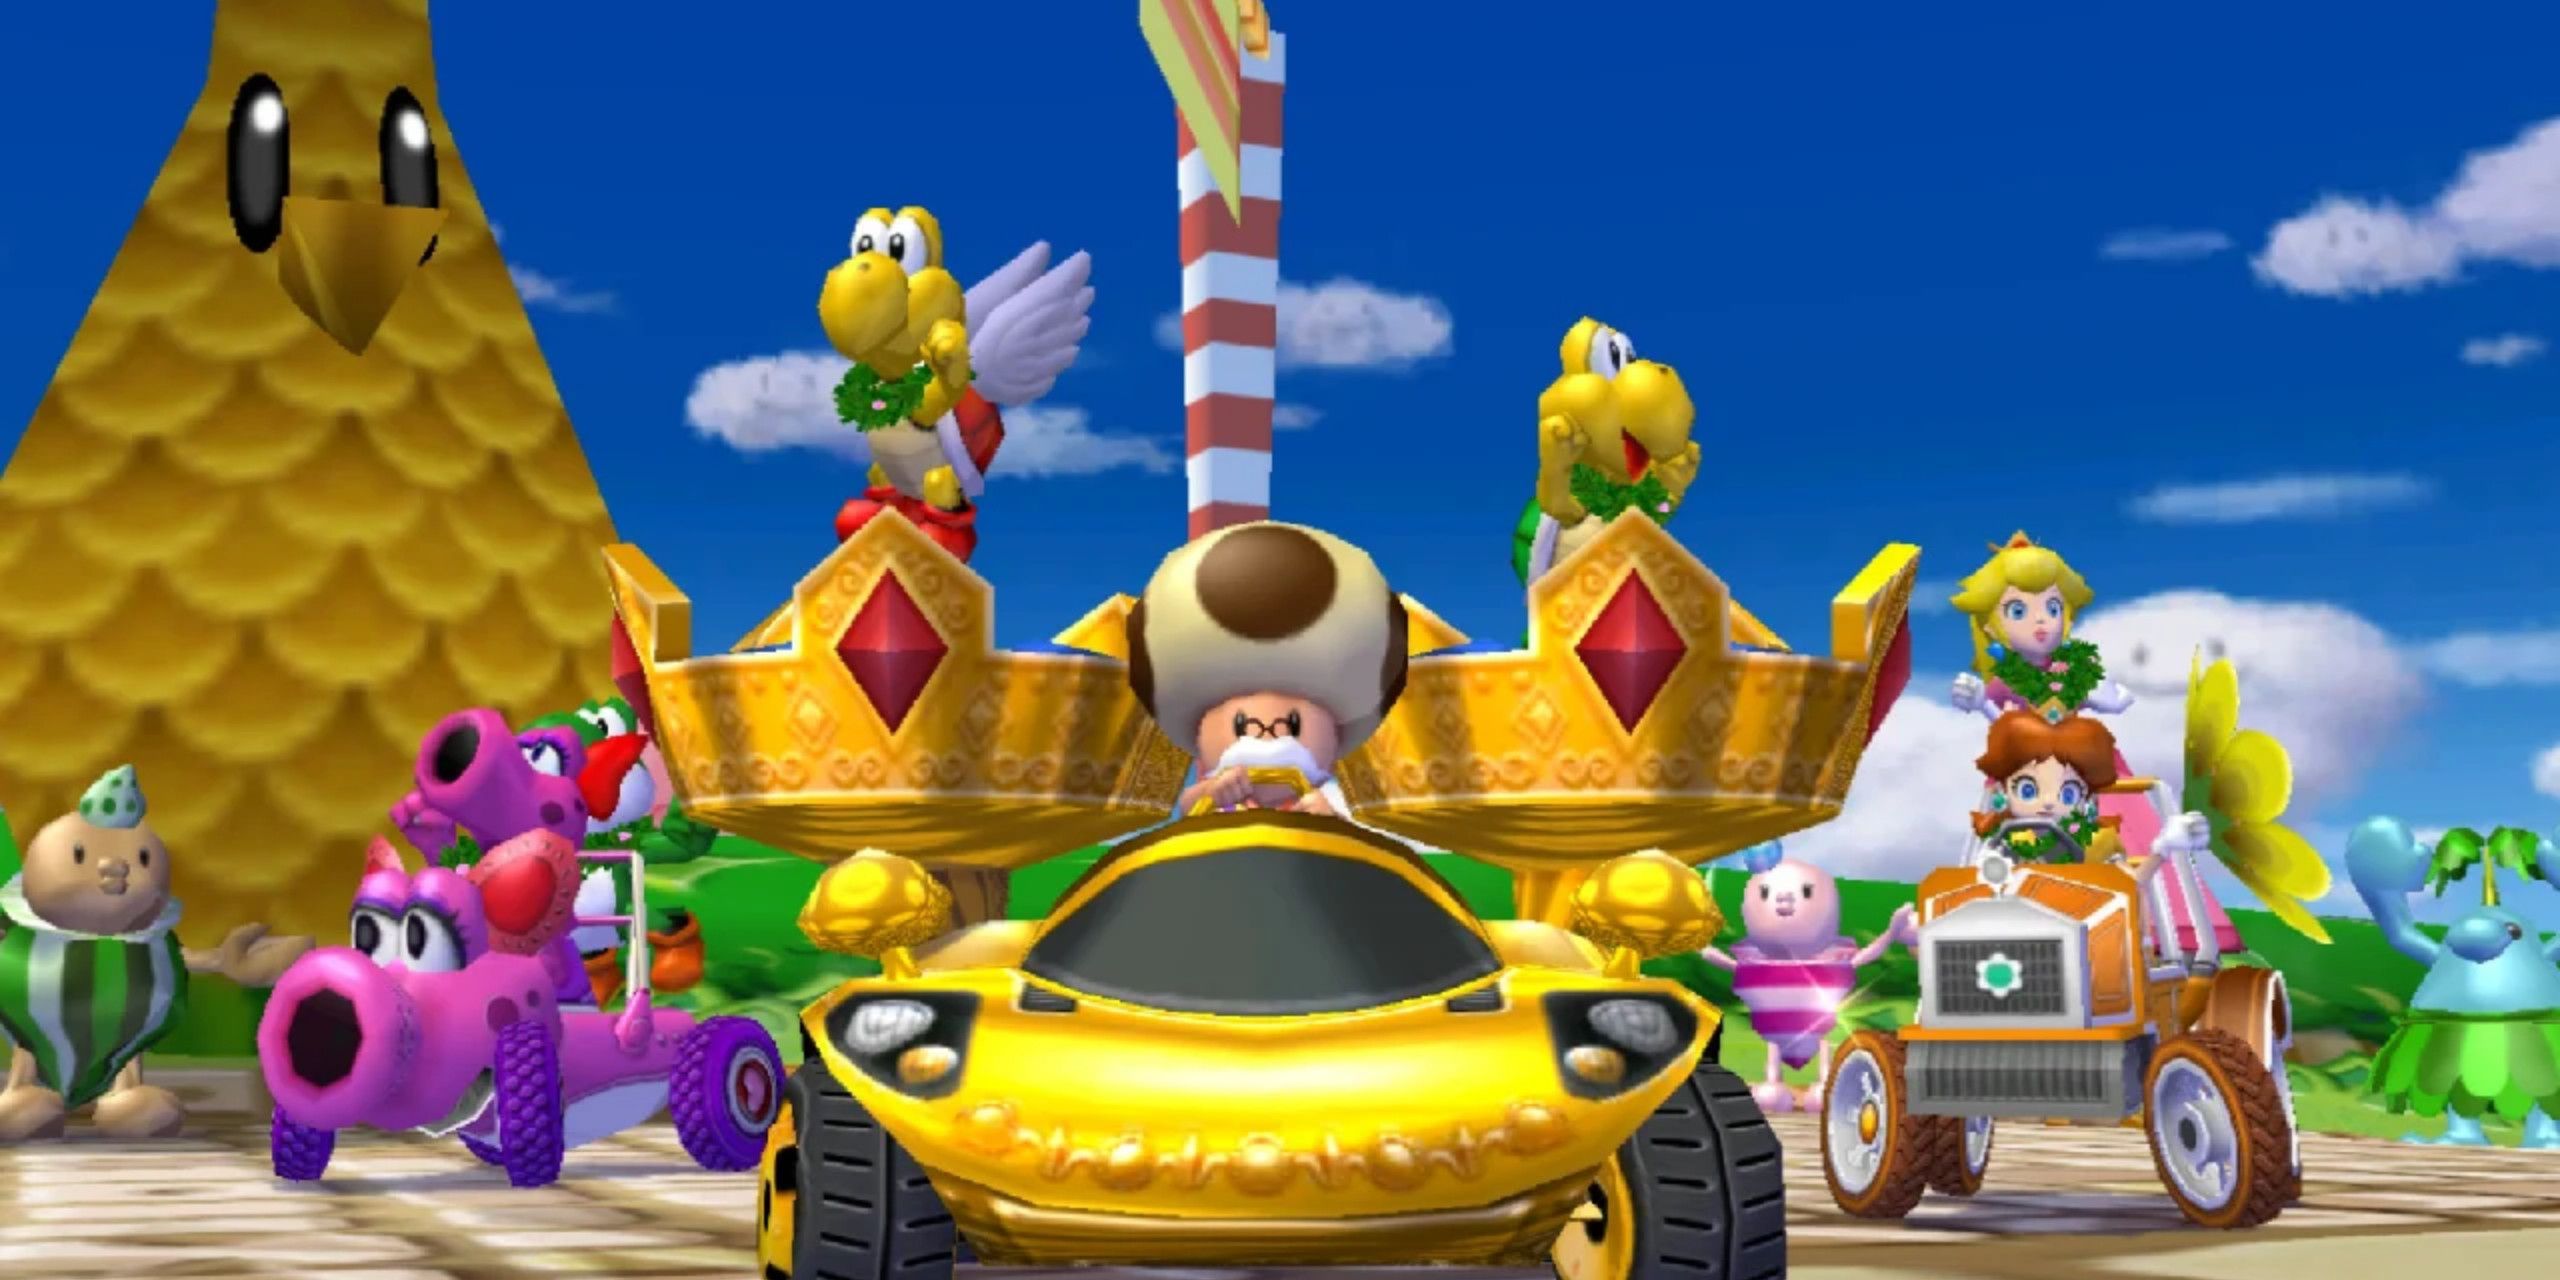 Toadsworth at the head of the line with two yellow Goompas behind him, Birdo, Peach and Daisy